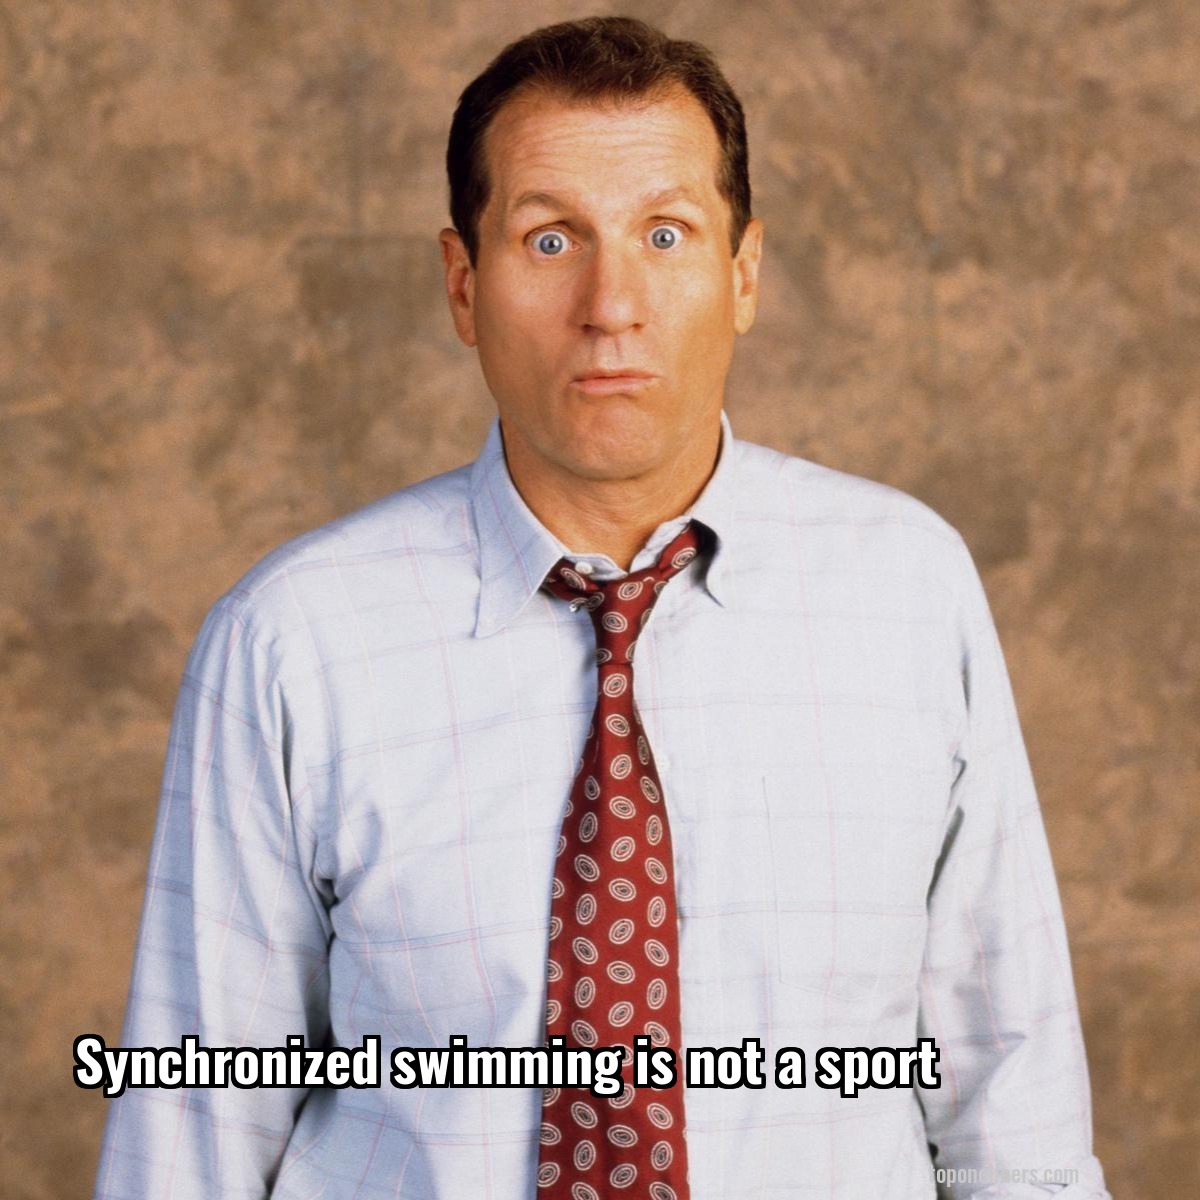 Synchronized swimming is not a sport